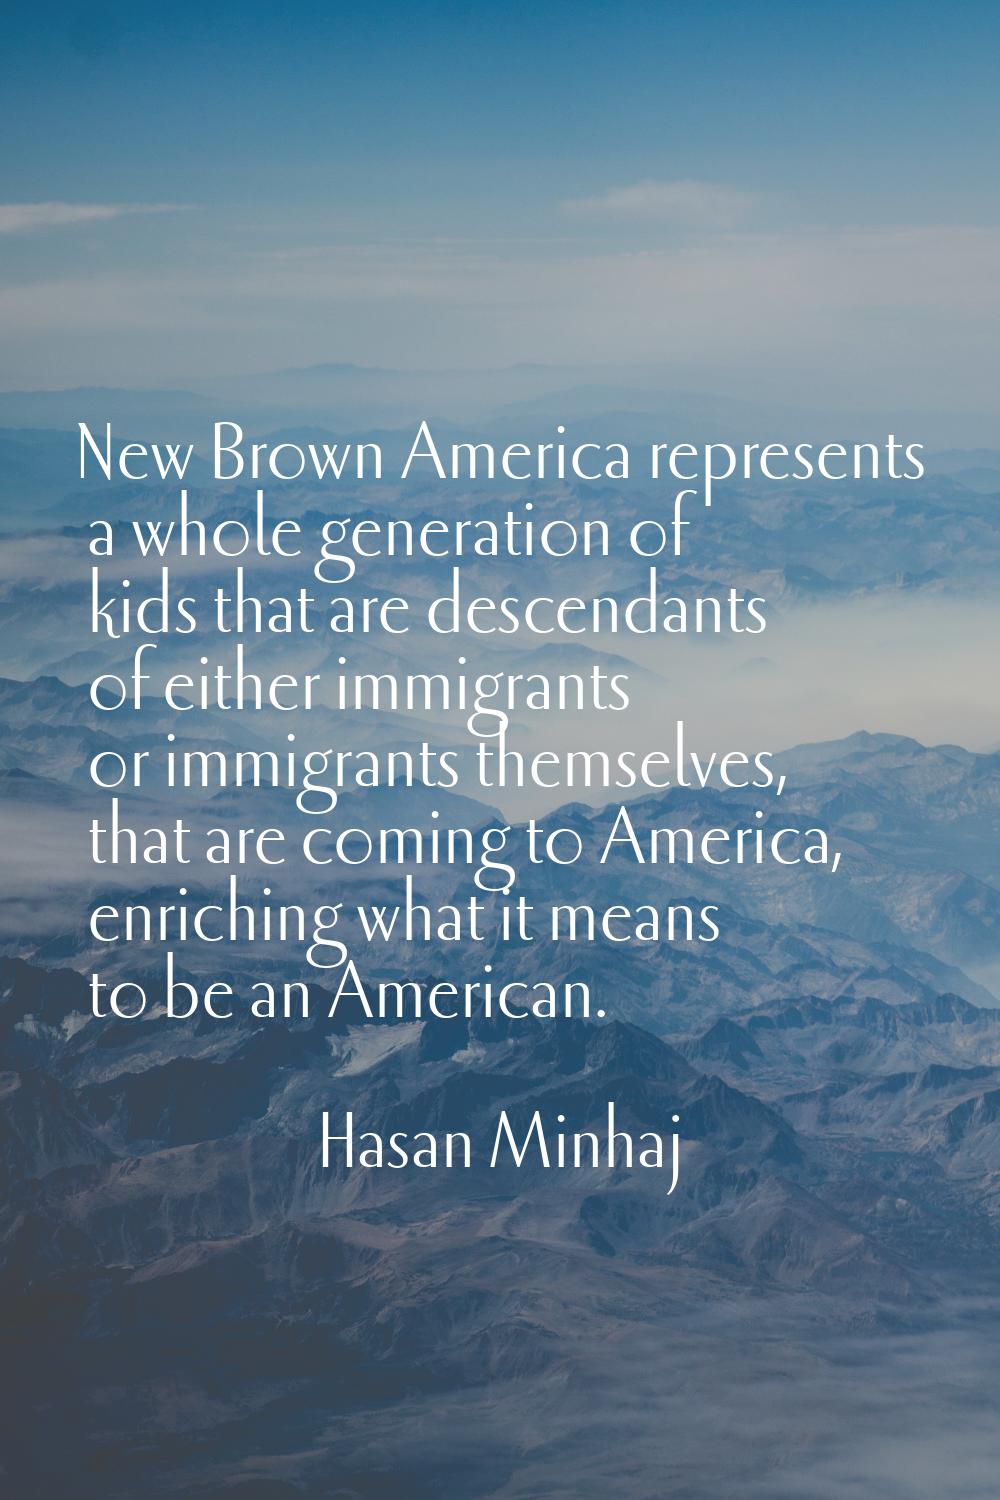 New Brown America represents a whole generation of kids that are descendants of either immigrants o